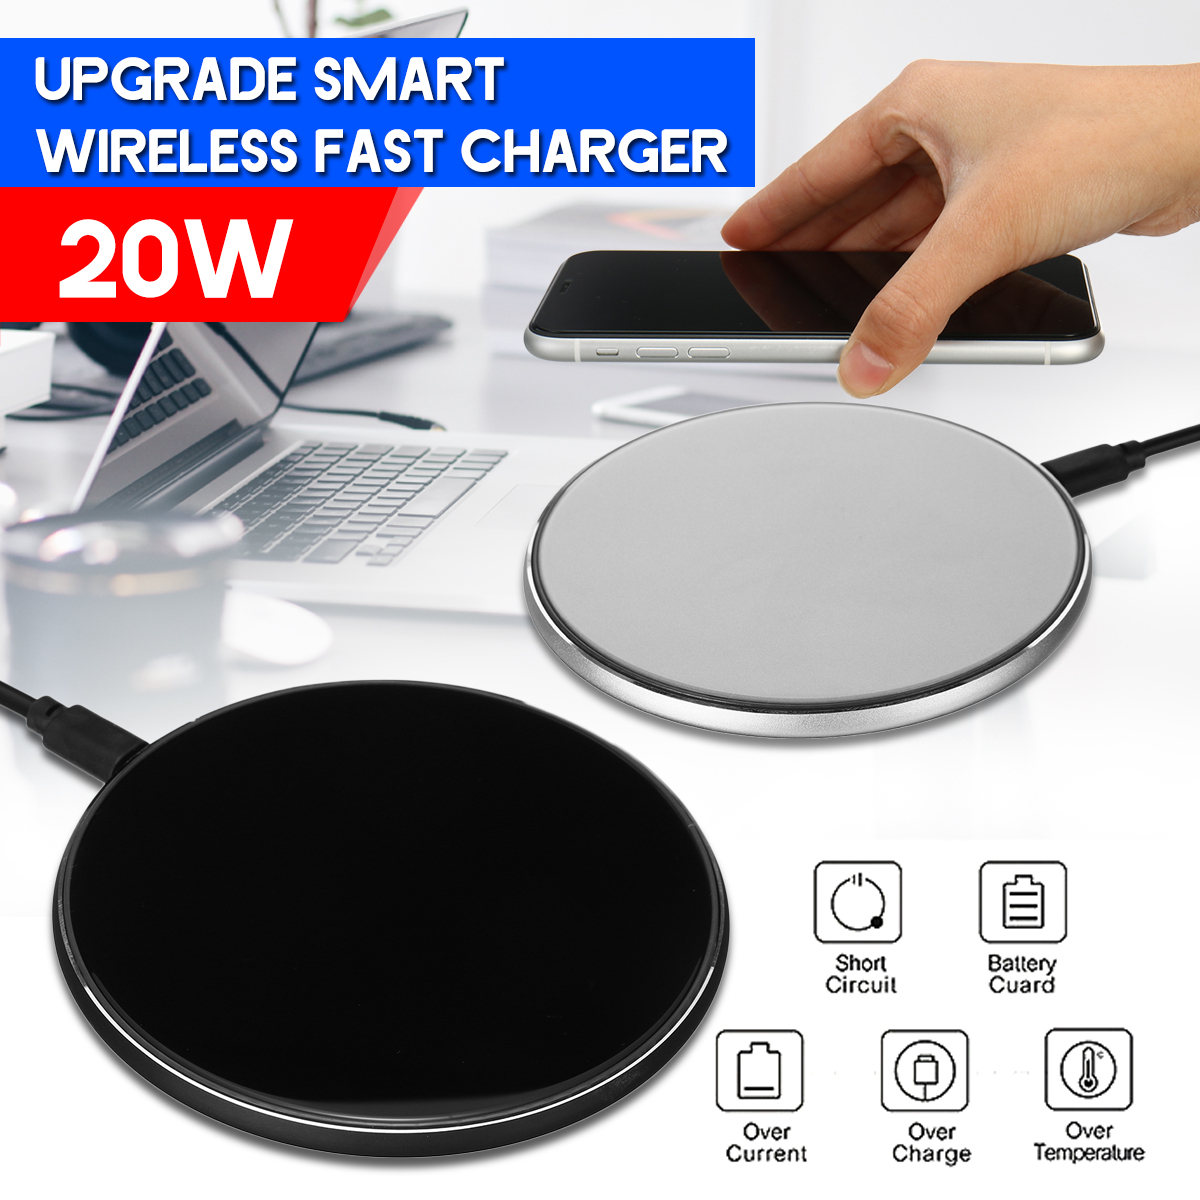 Bakeey-20W-Wireless-Charger-for-iPhone-Xs-Max-X-8-Plus-for-Samsung-Note-9-Note-8-S10-Plus-1614887-1